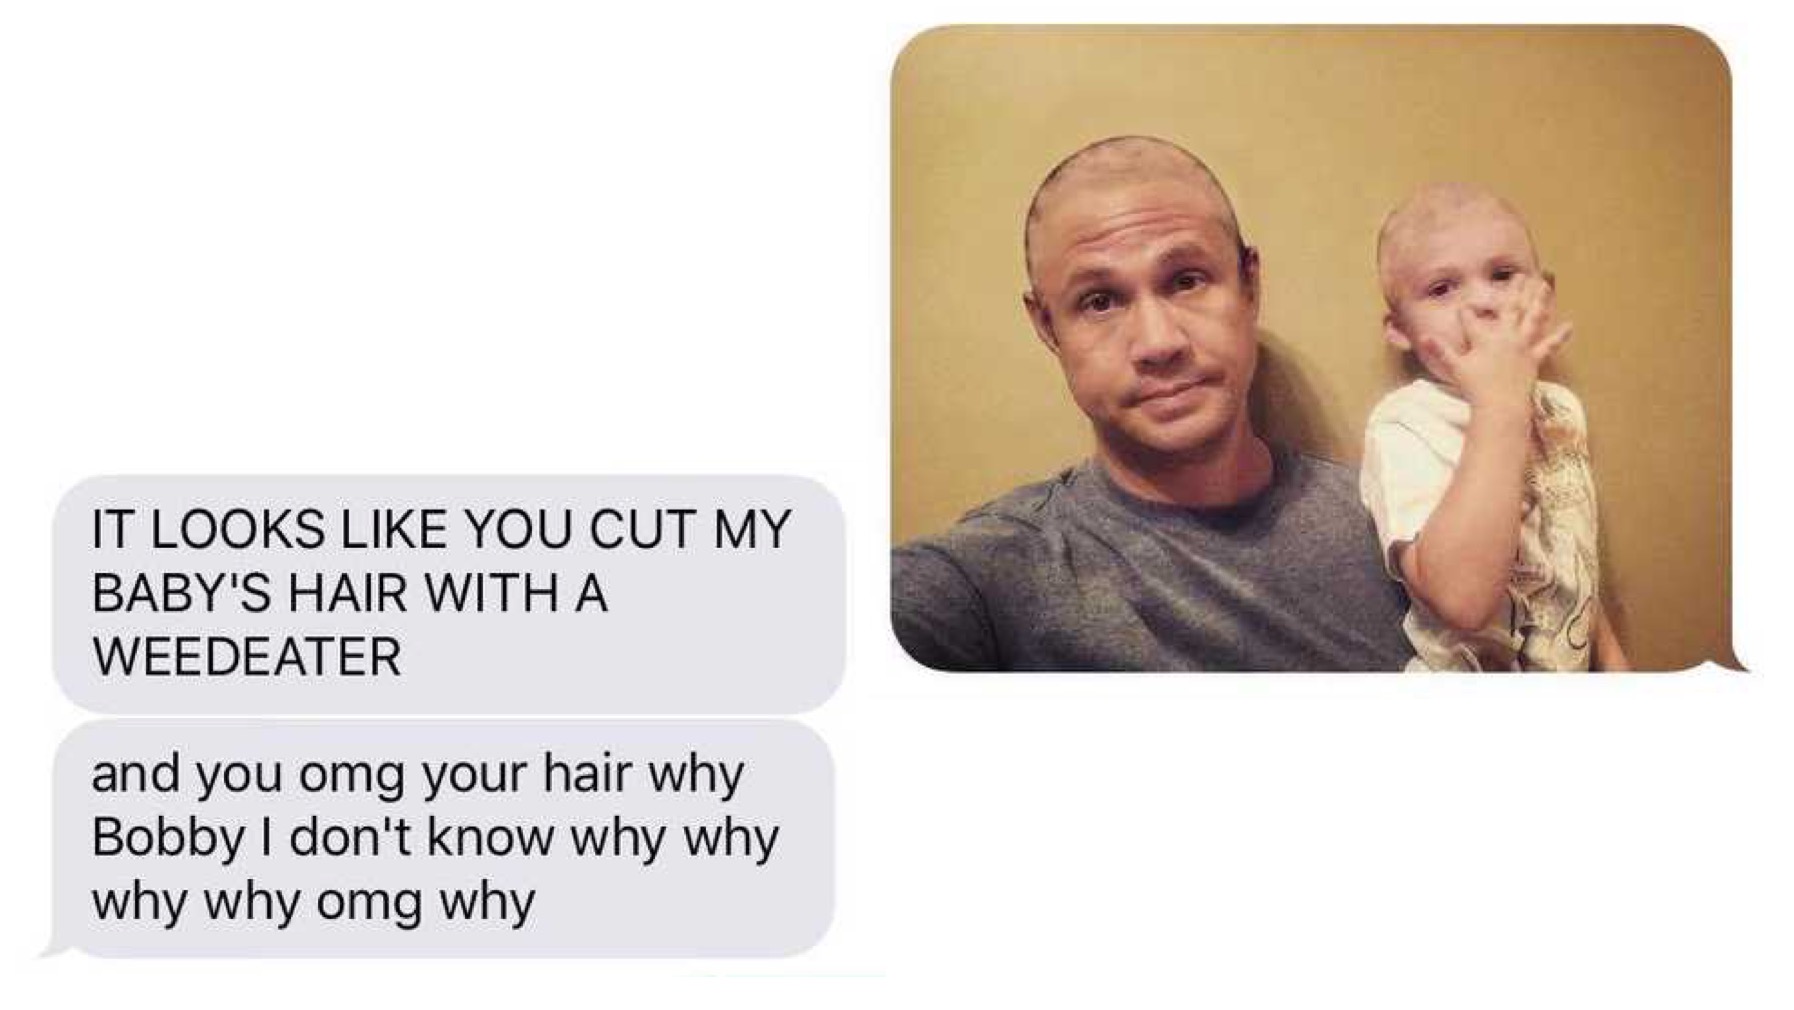 Dad Shaves Toddler's Head With Photoshop to Prank Wife